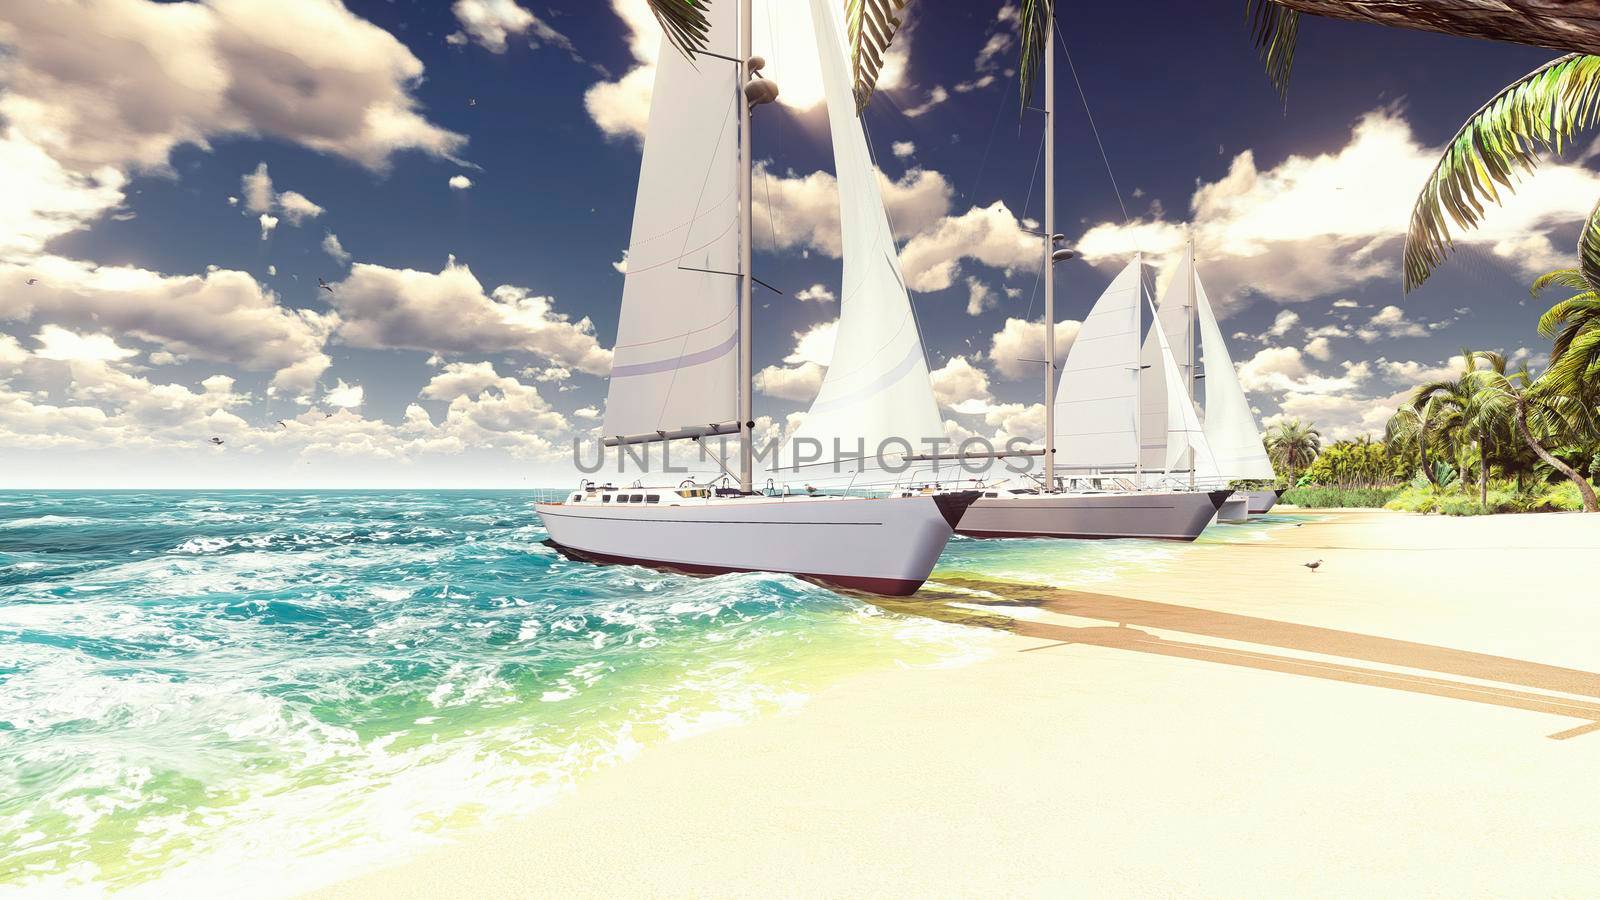 Sailboats on the beach of a desert island in the beautiful blue ocean.